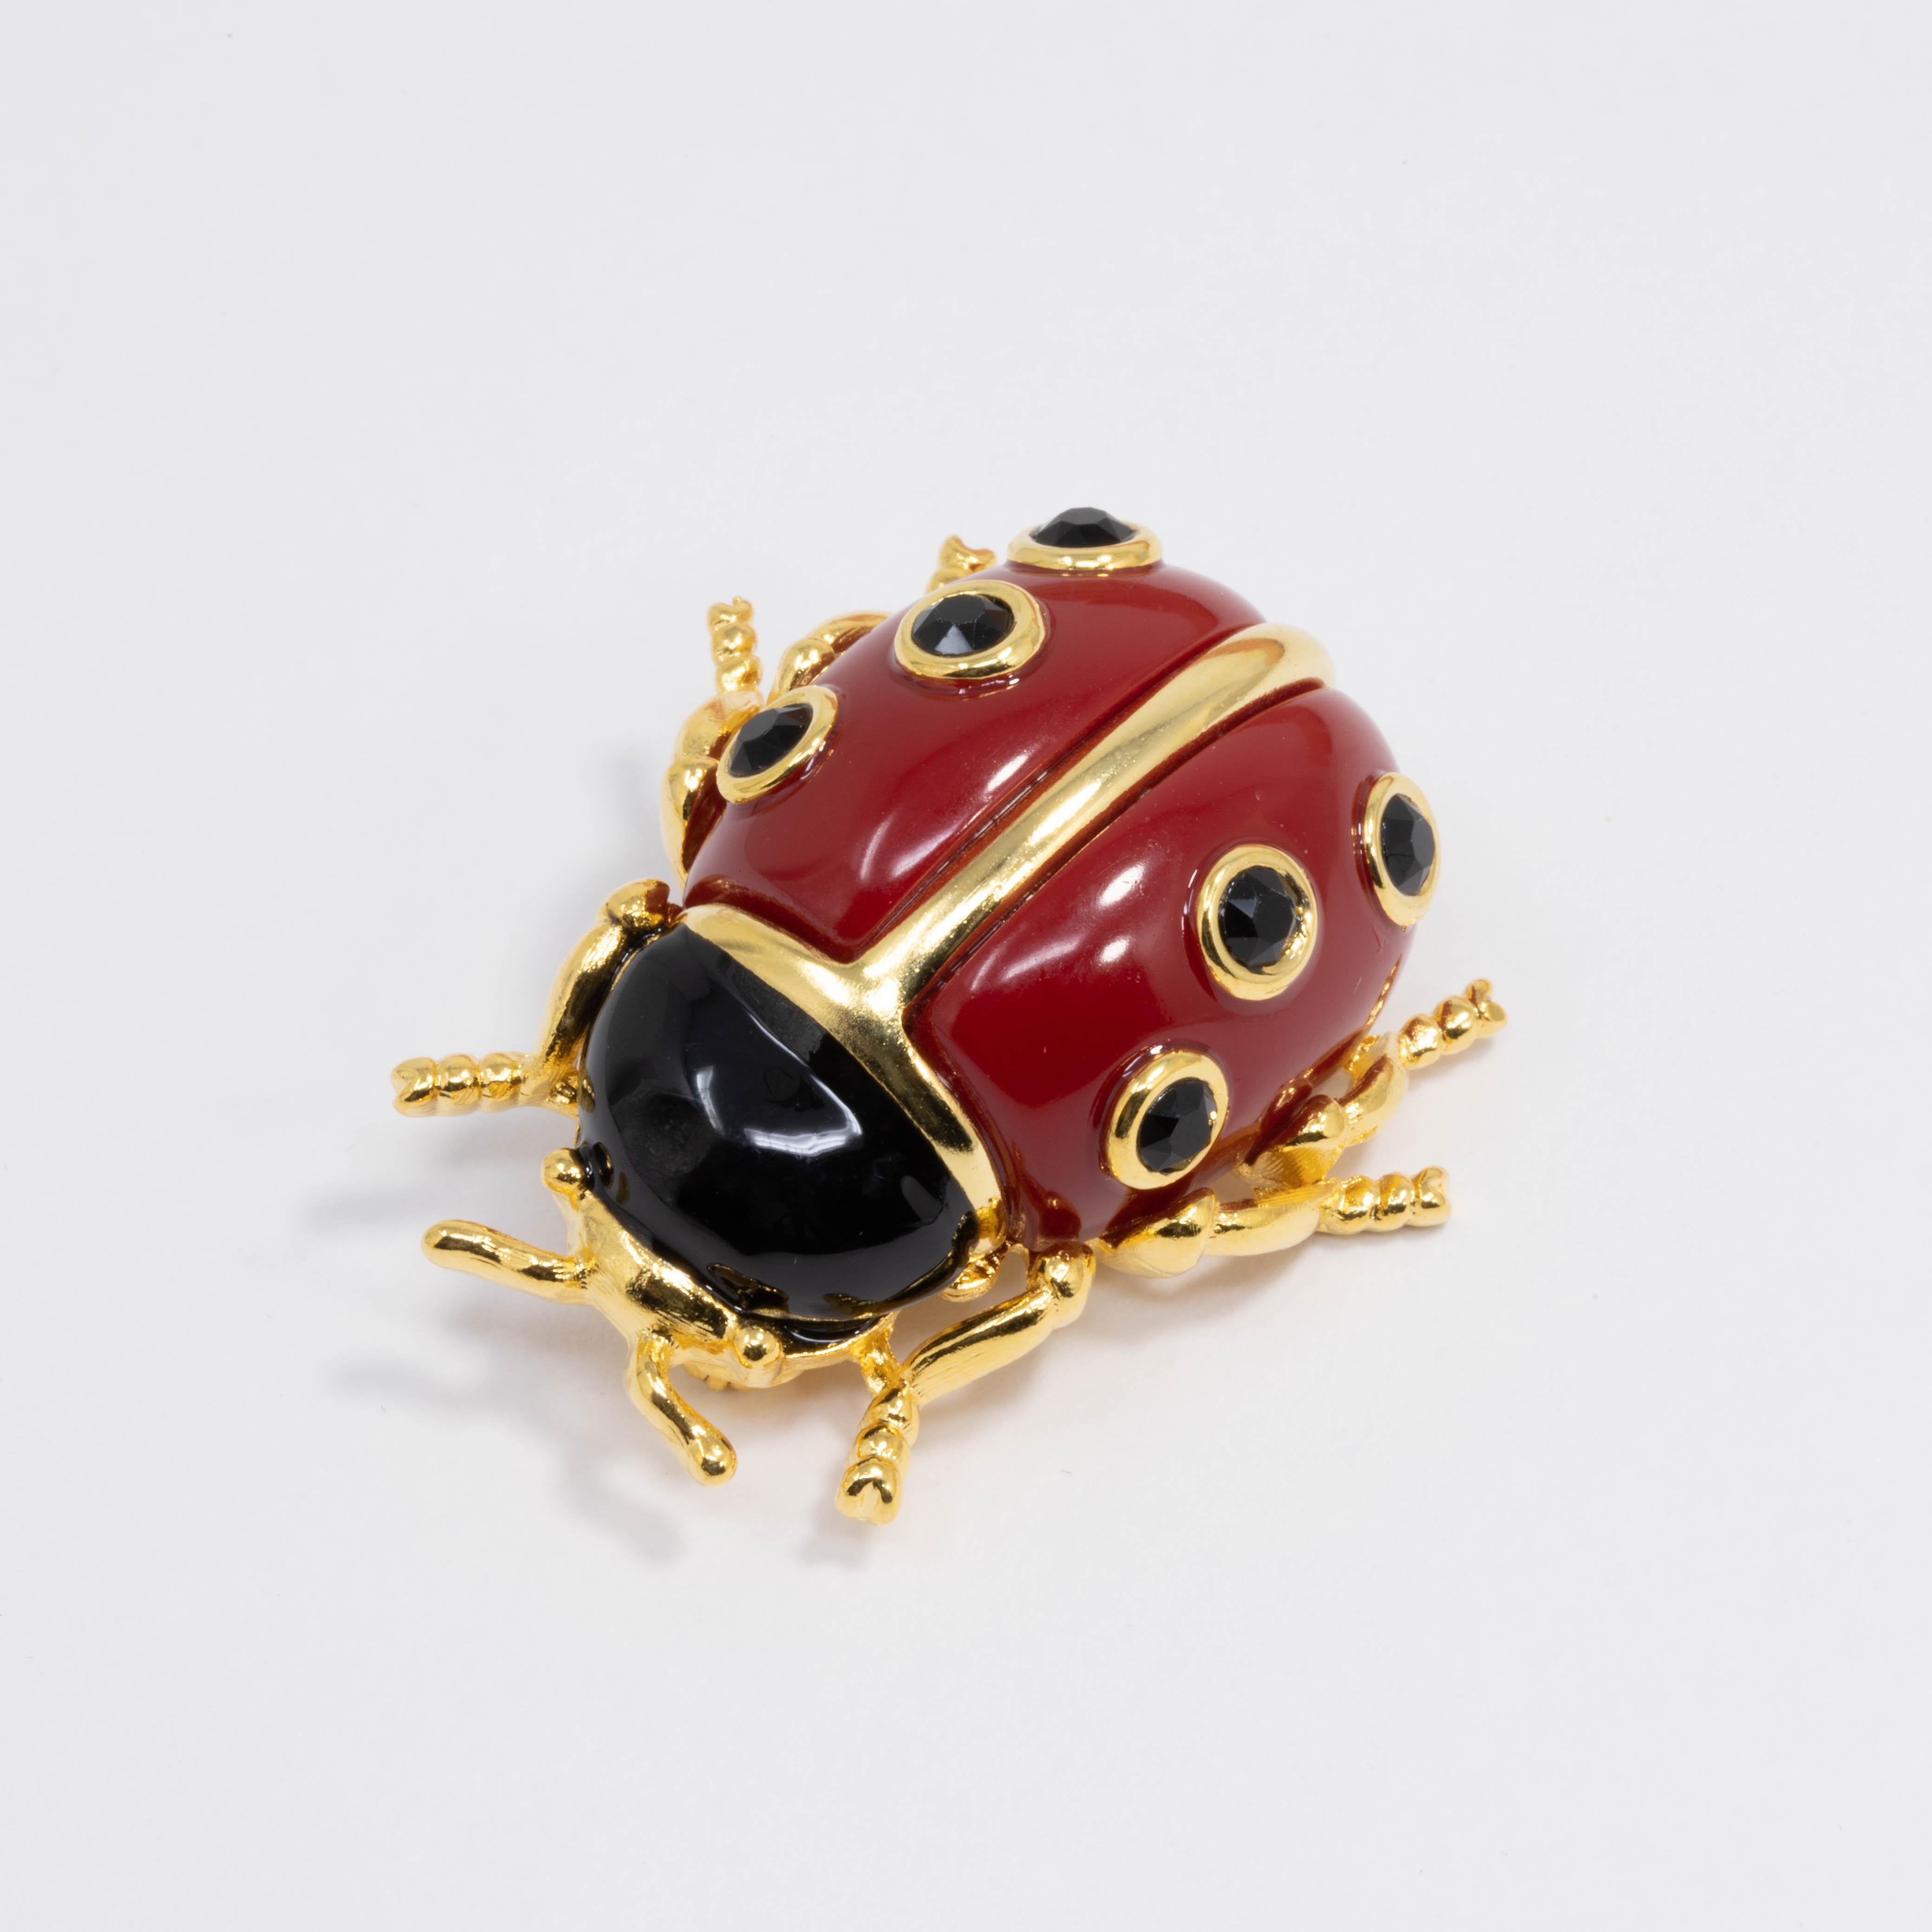 Ladybug pin brooch by Kenneth Jay Lane. This colorful critter features a golden body painted with red and black enamel.

Gold plated.

Tags, Marks, Hallmarks: KJL, Made in USA